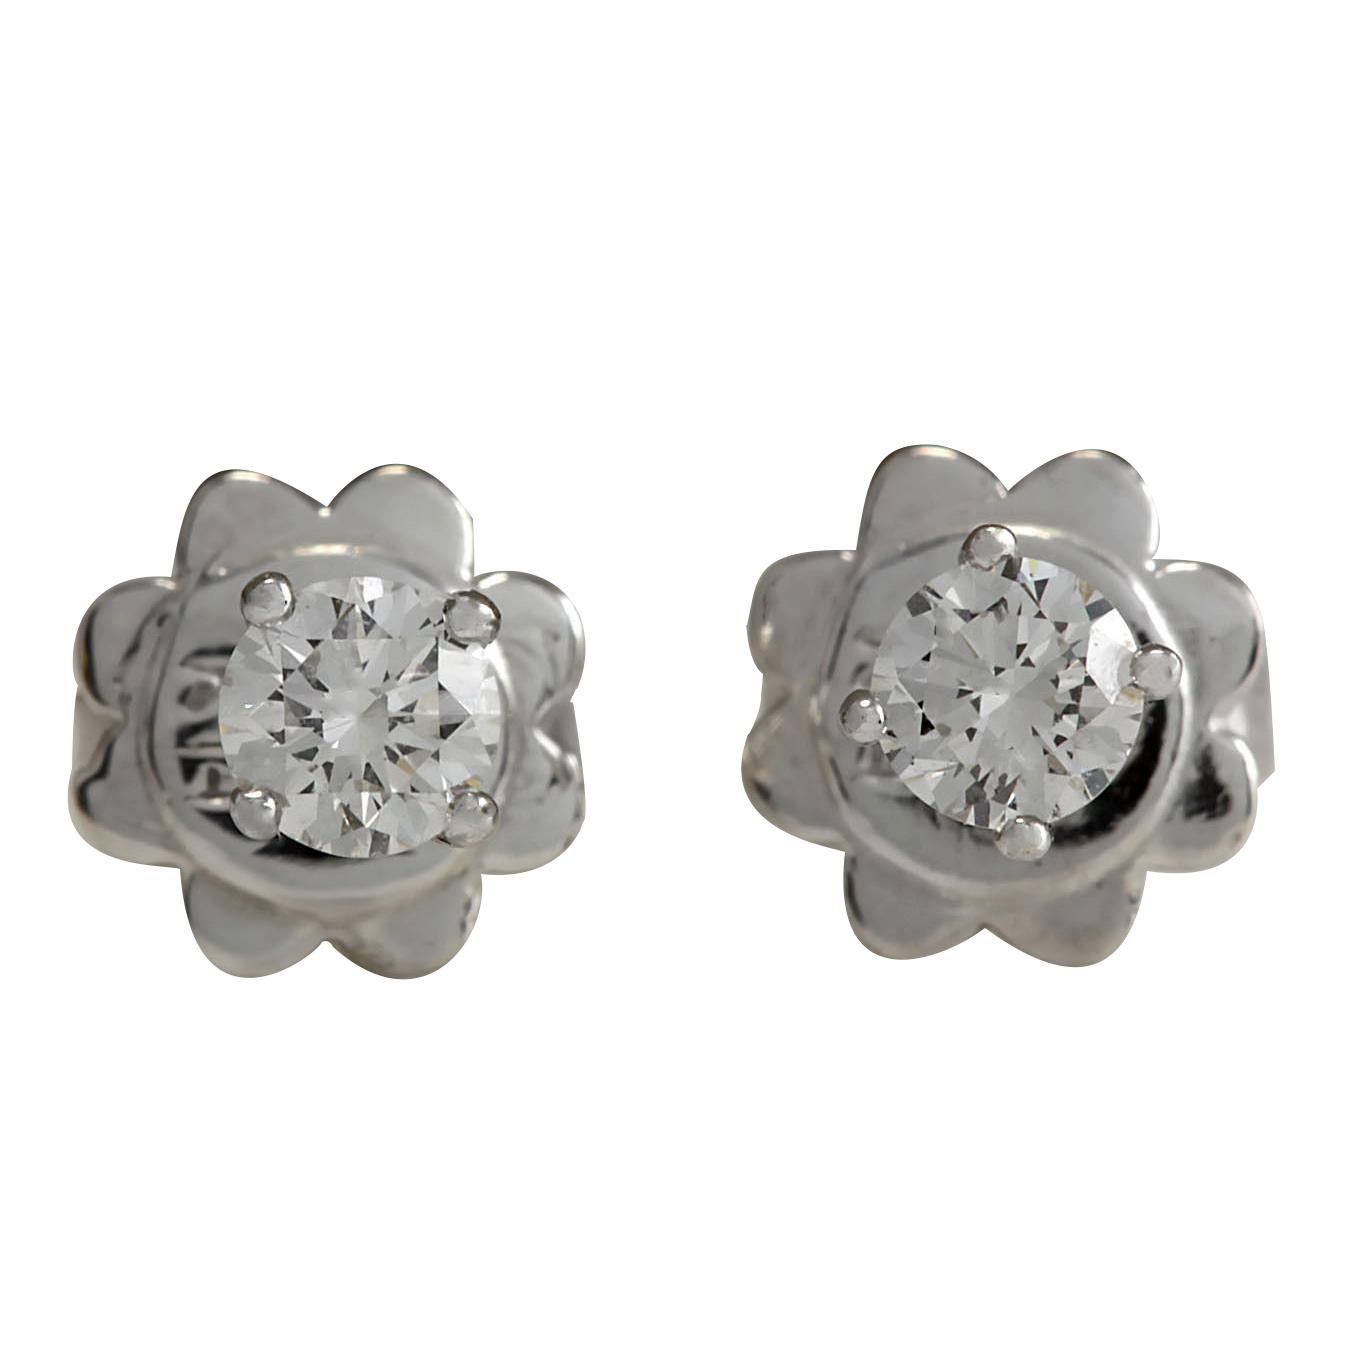 Diamond Stud Earrings In 14 Karat White Gold  In New Condition For Sale In Los Angeles, CA